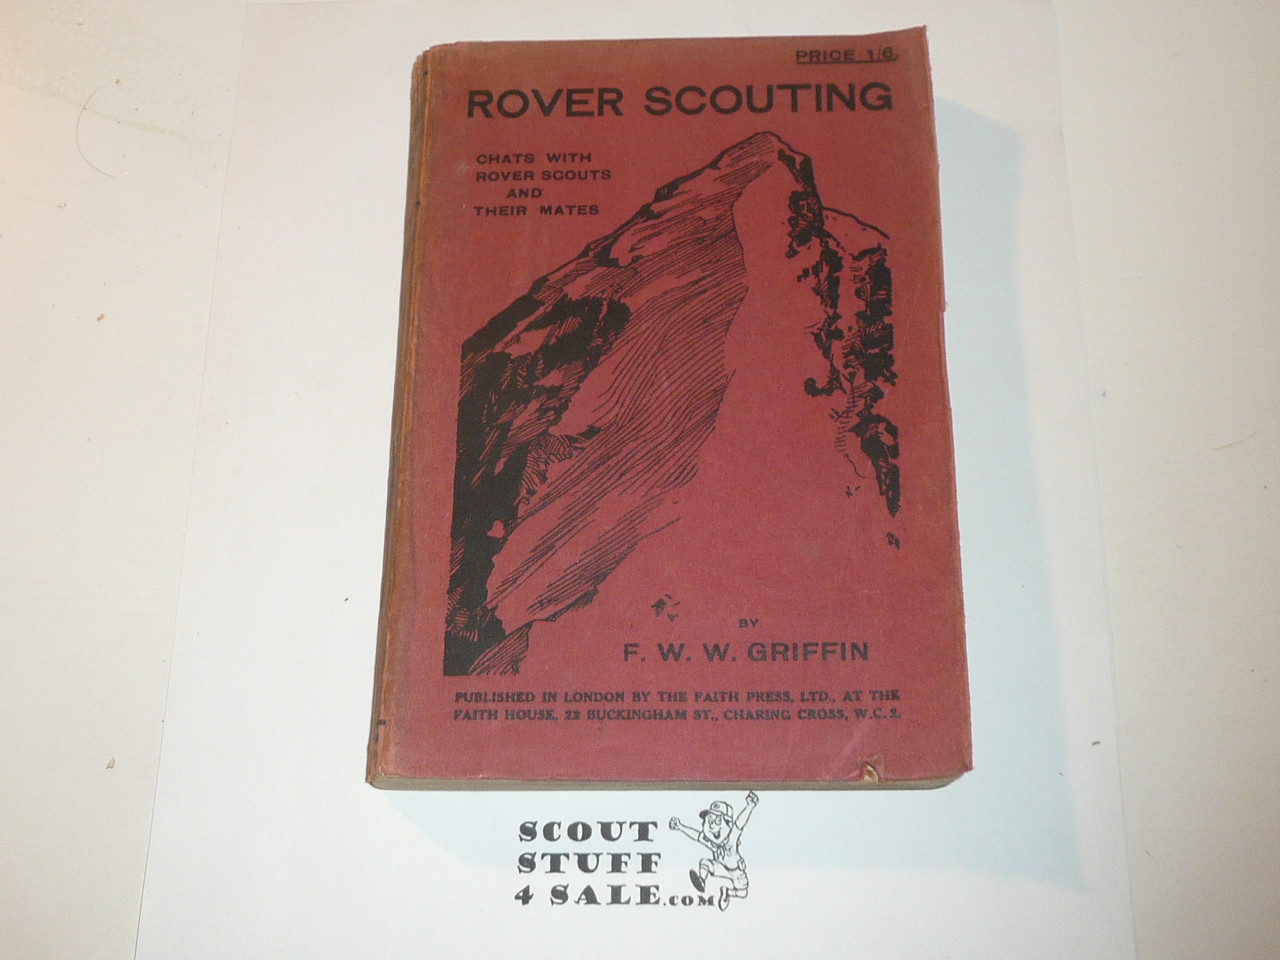 Rover Scouting, by F. W. W. Griffin, March 1930 Pringing